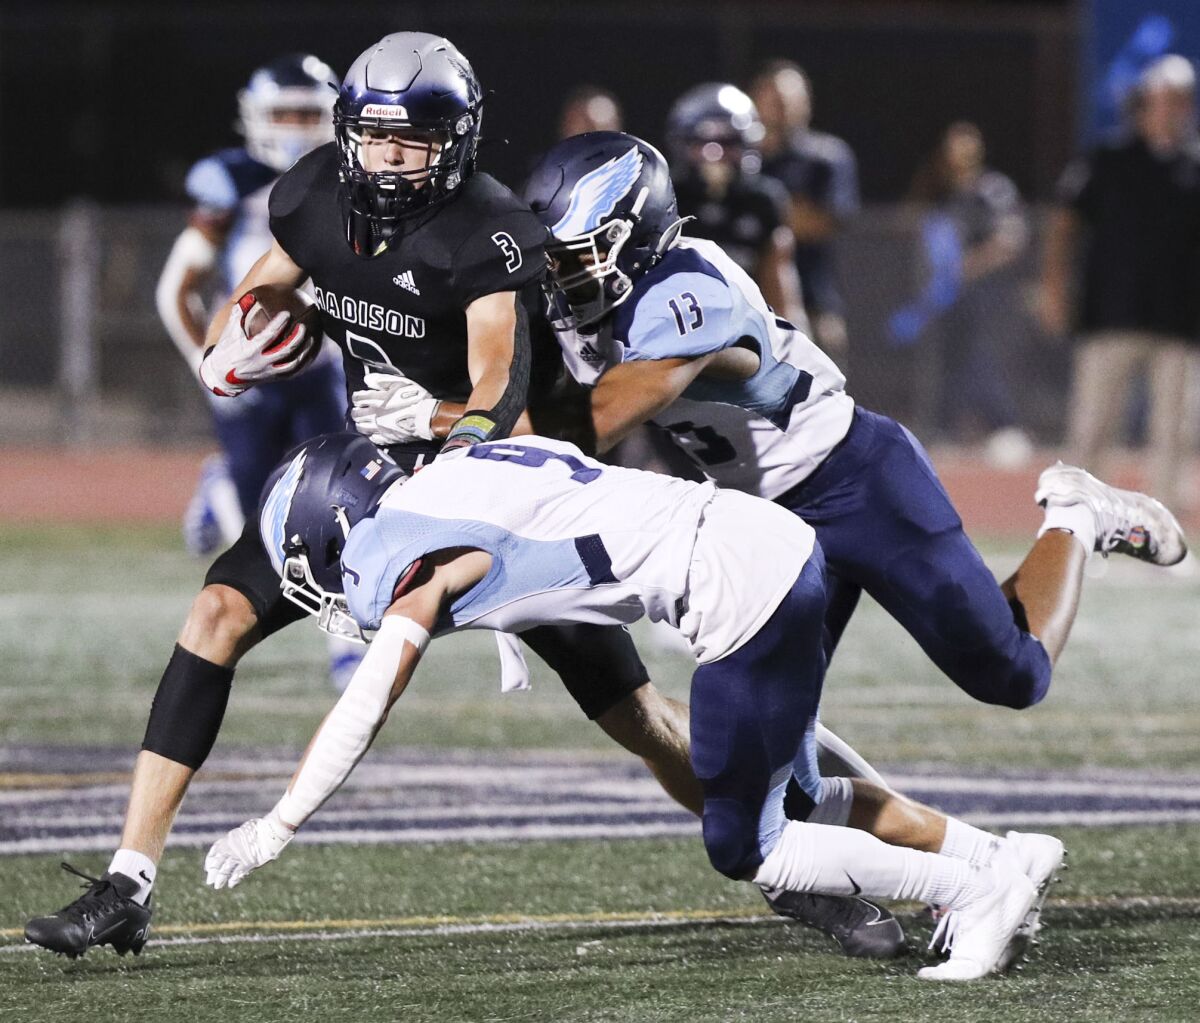 Madison's Jake Jackson (3) is taken down by Granite Hills' Easton Peterson (9) and Nokoi Maddox (13) during Friday's game.